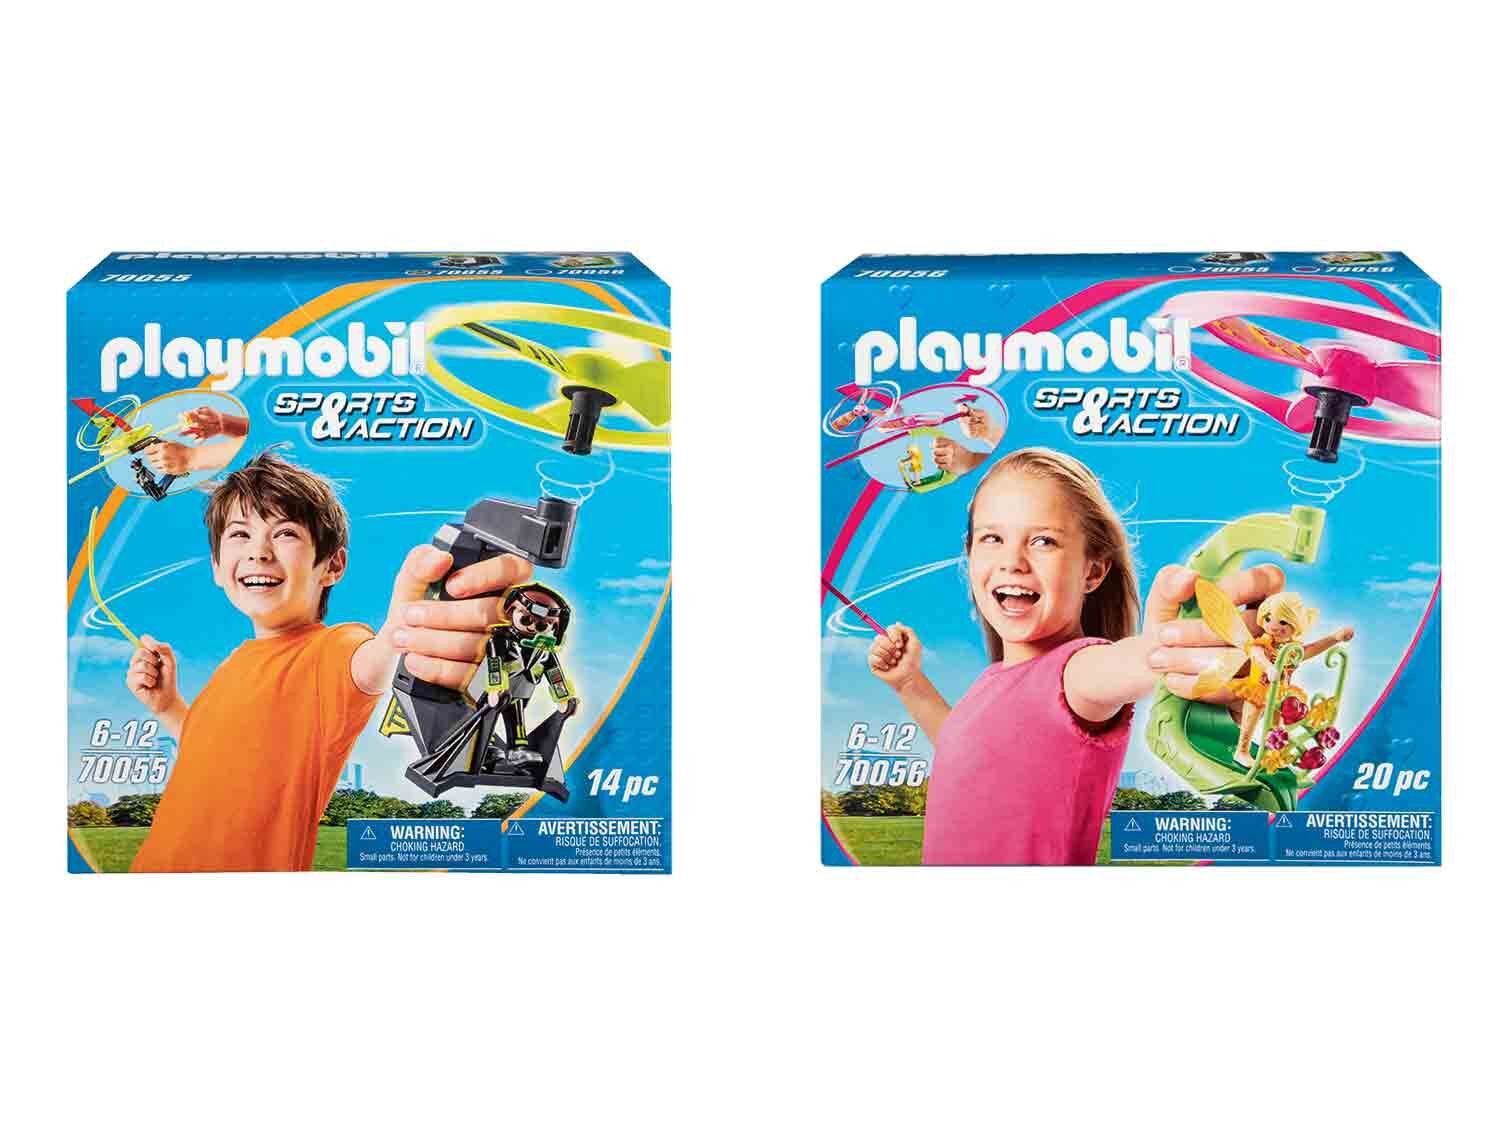 Playmobil ® Sports & Action Pull String Flyer